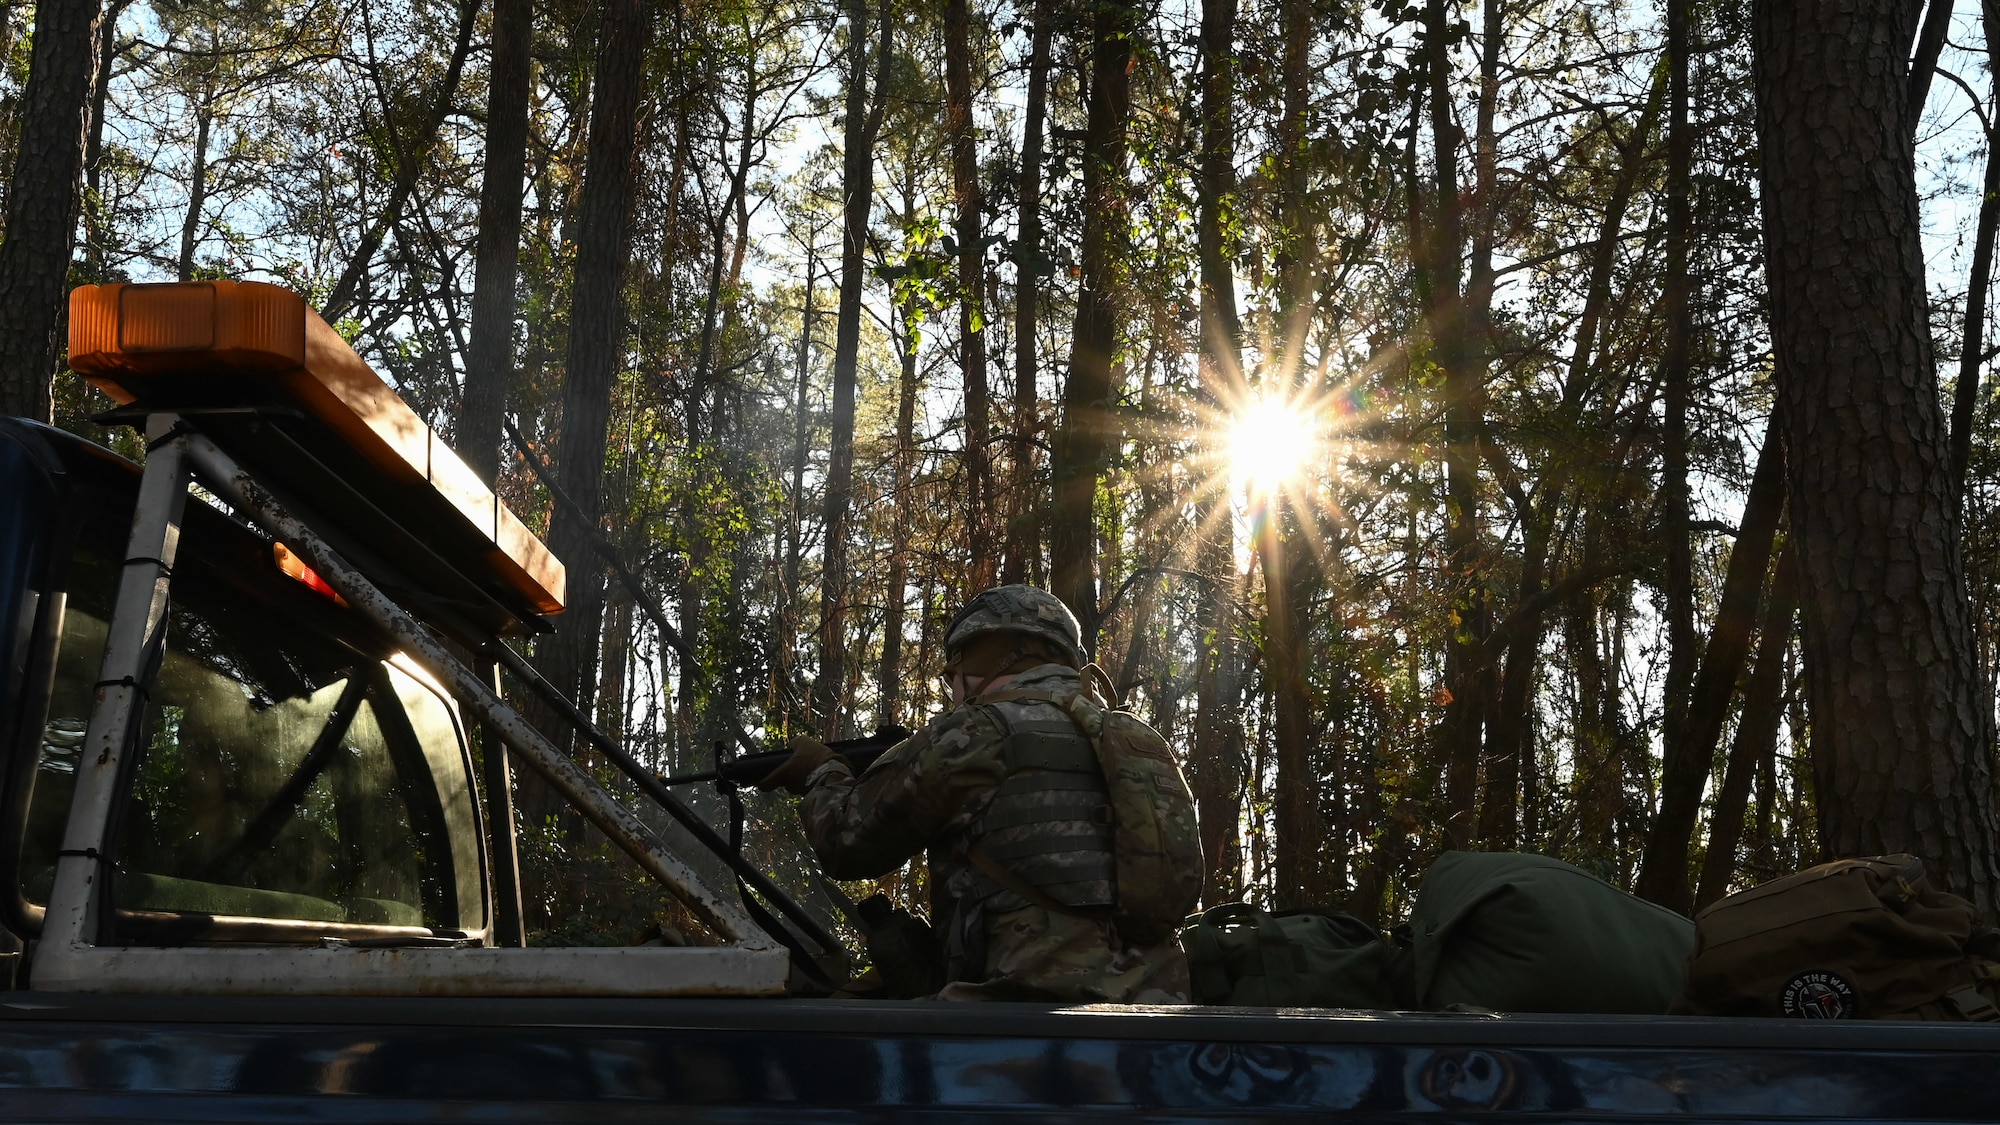 A U.S. Airman assigned to the 4th Civil Engineer Squadron aim an M4 carbine during a bivouac training exercise at Seymour Johnson Air Force Base, North Carolina, Jan. 18, 2024. Over the course of the exercise, participants practiced building defensive fighting positions, responded to vehicle checkpoints, and performed post-attack reconnaissance sweeps , while demonstrating their ability to survive and operate in a hostile environment. (U.S. Air Force Photo by Airman Rebecca Tierney)